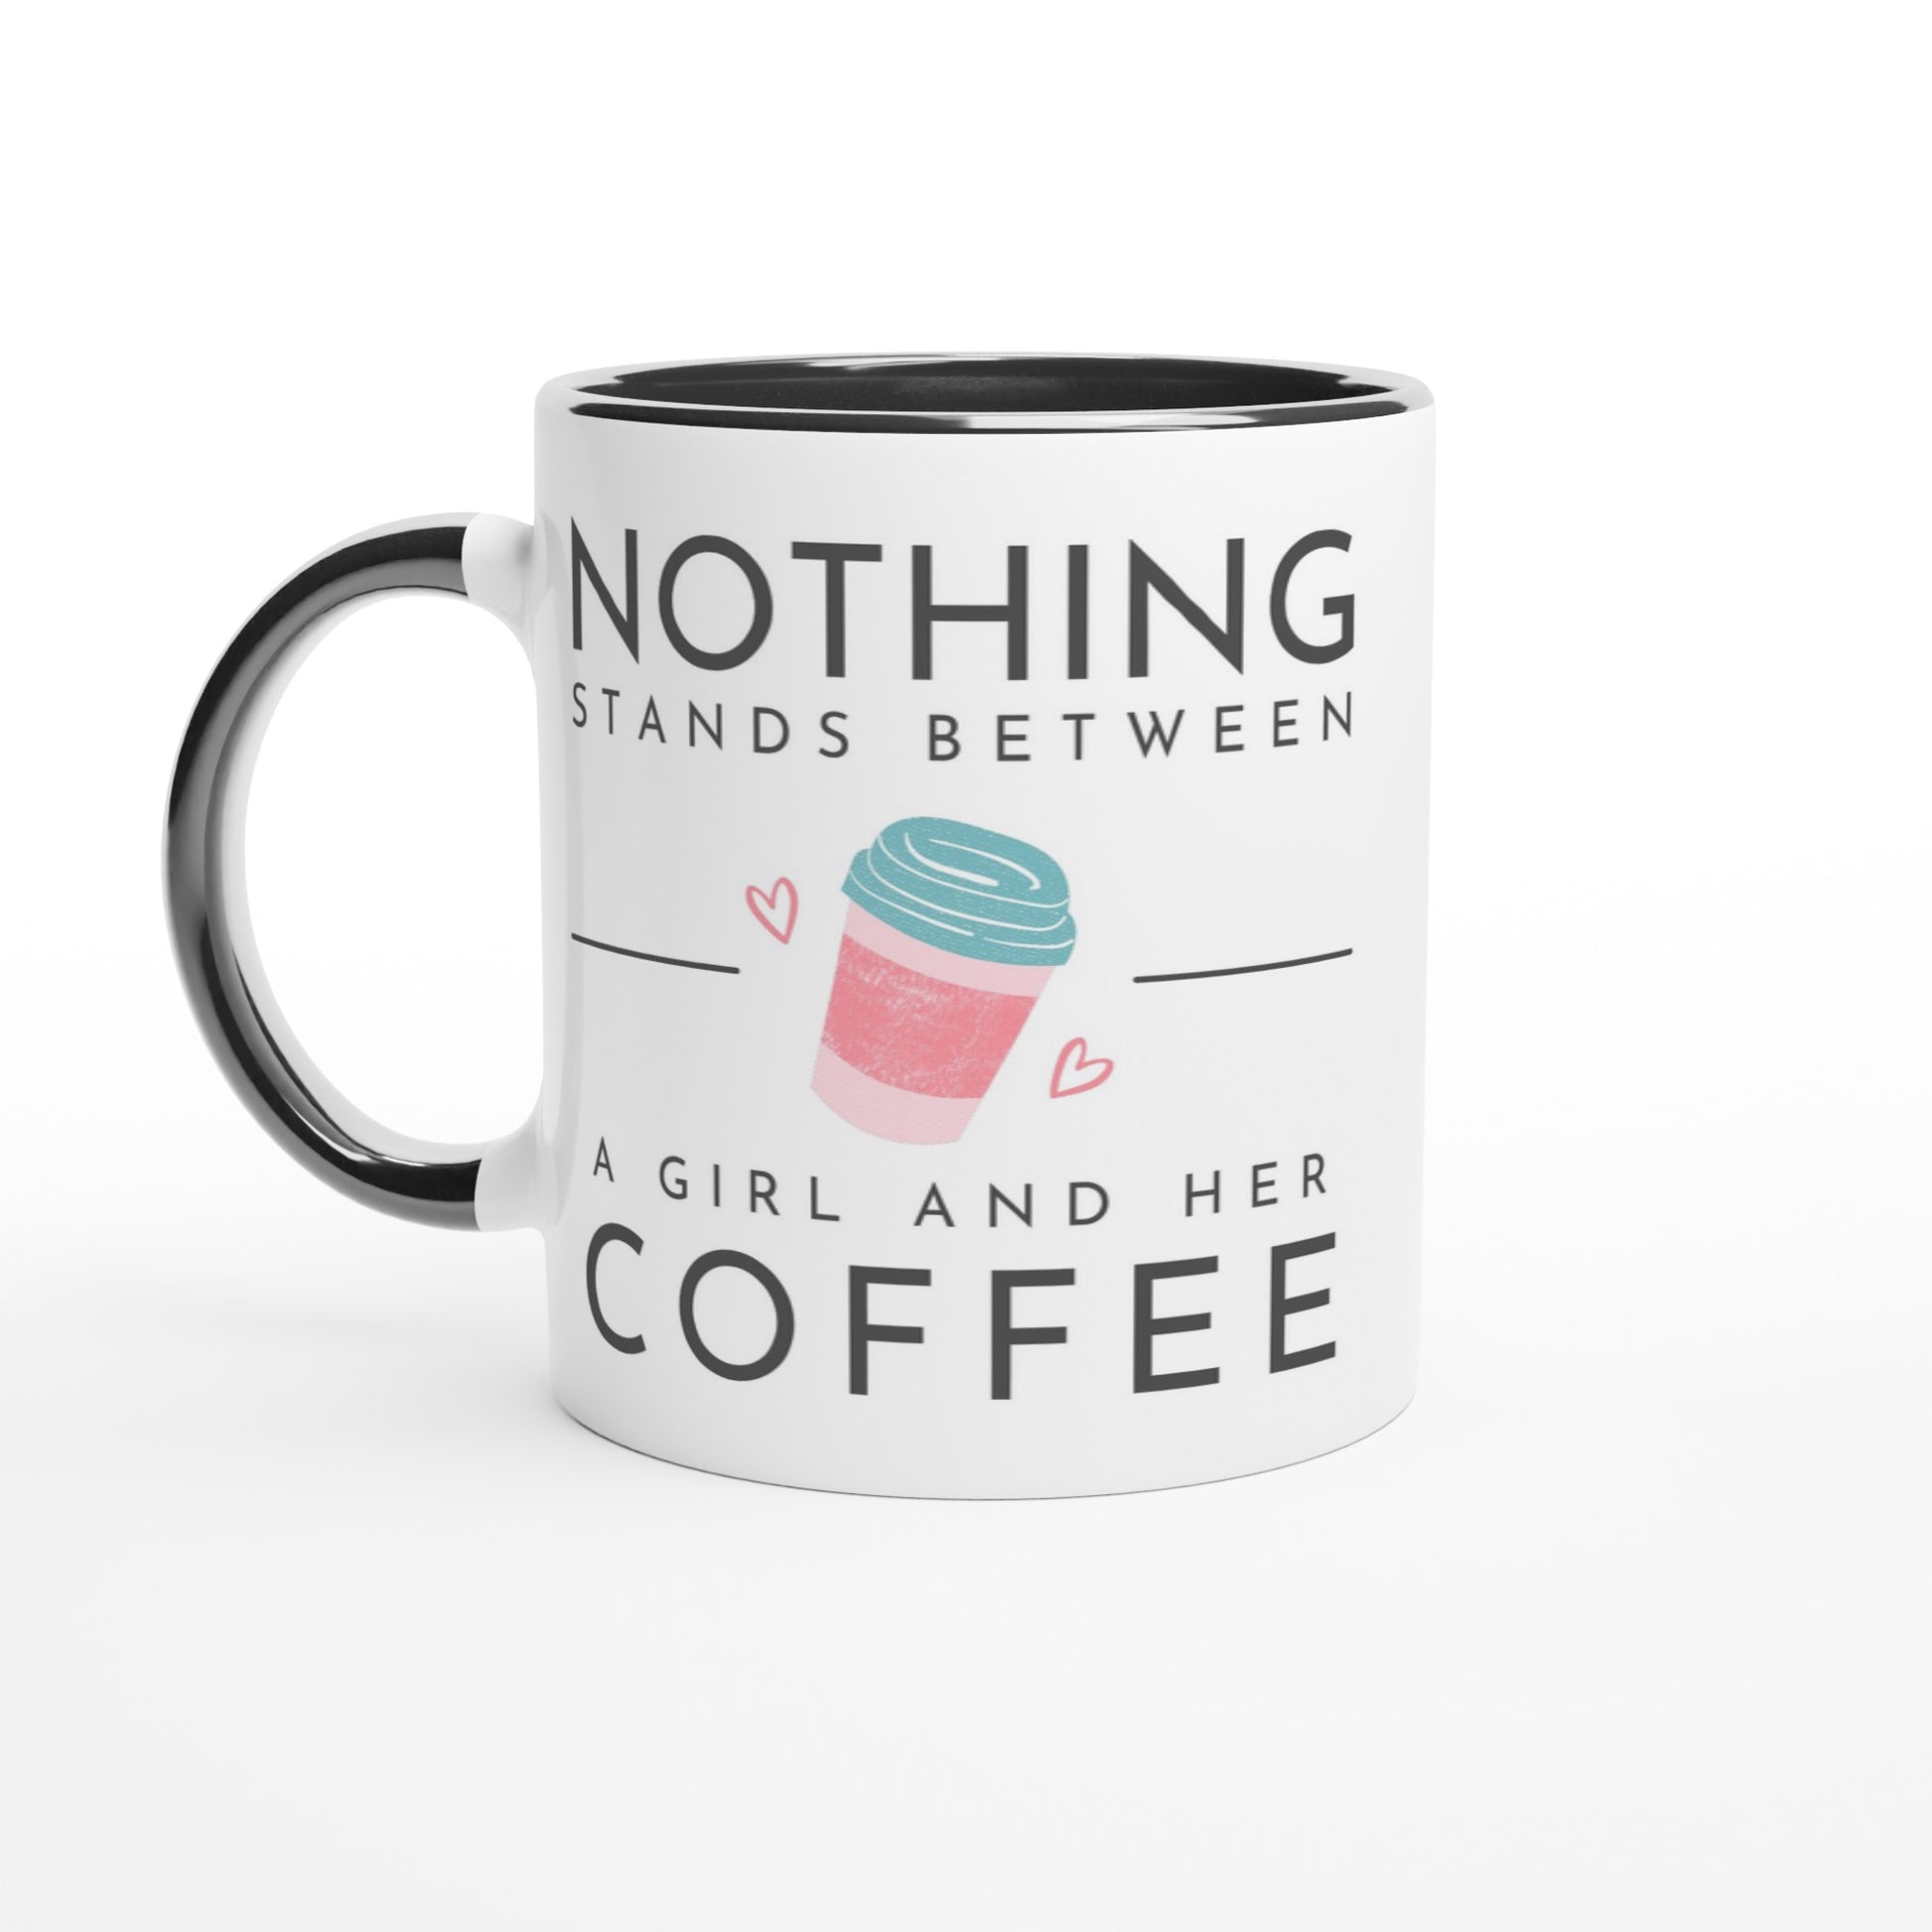 Nothing Stands Between A Girl And Her Coffee - White 11oz Ceramic Mug with Colour Inside Ceramic Black Colour 11oz Mug Coffee